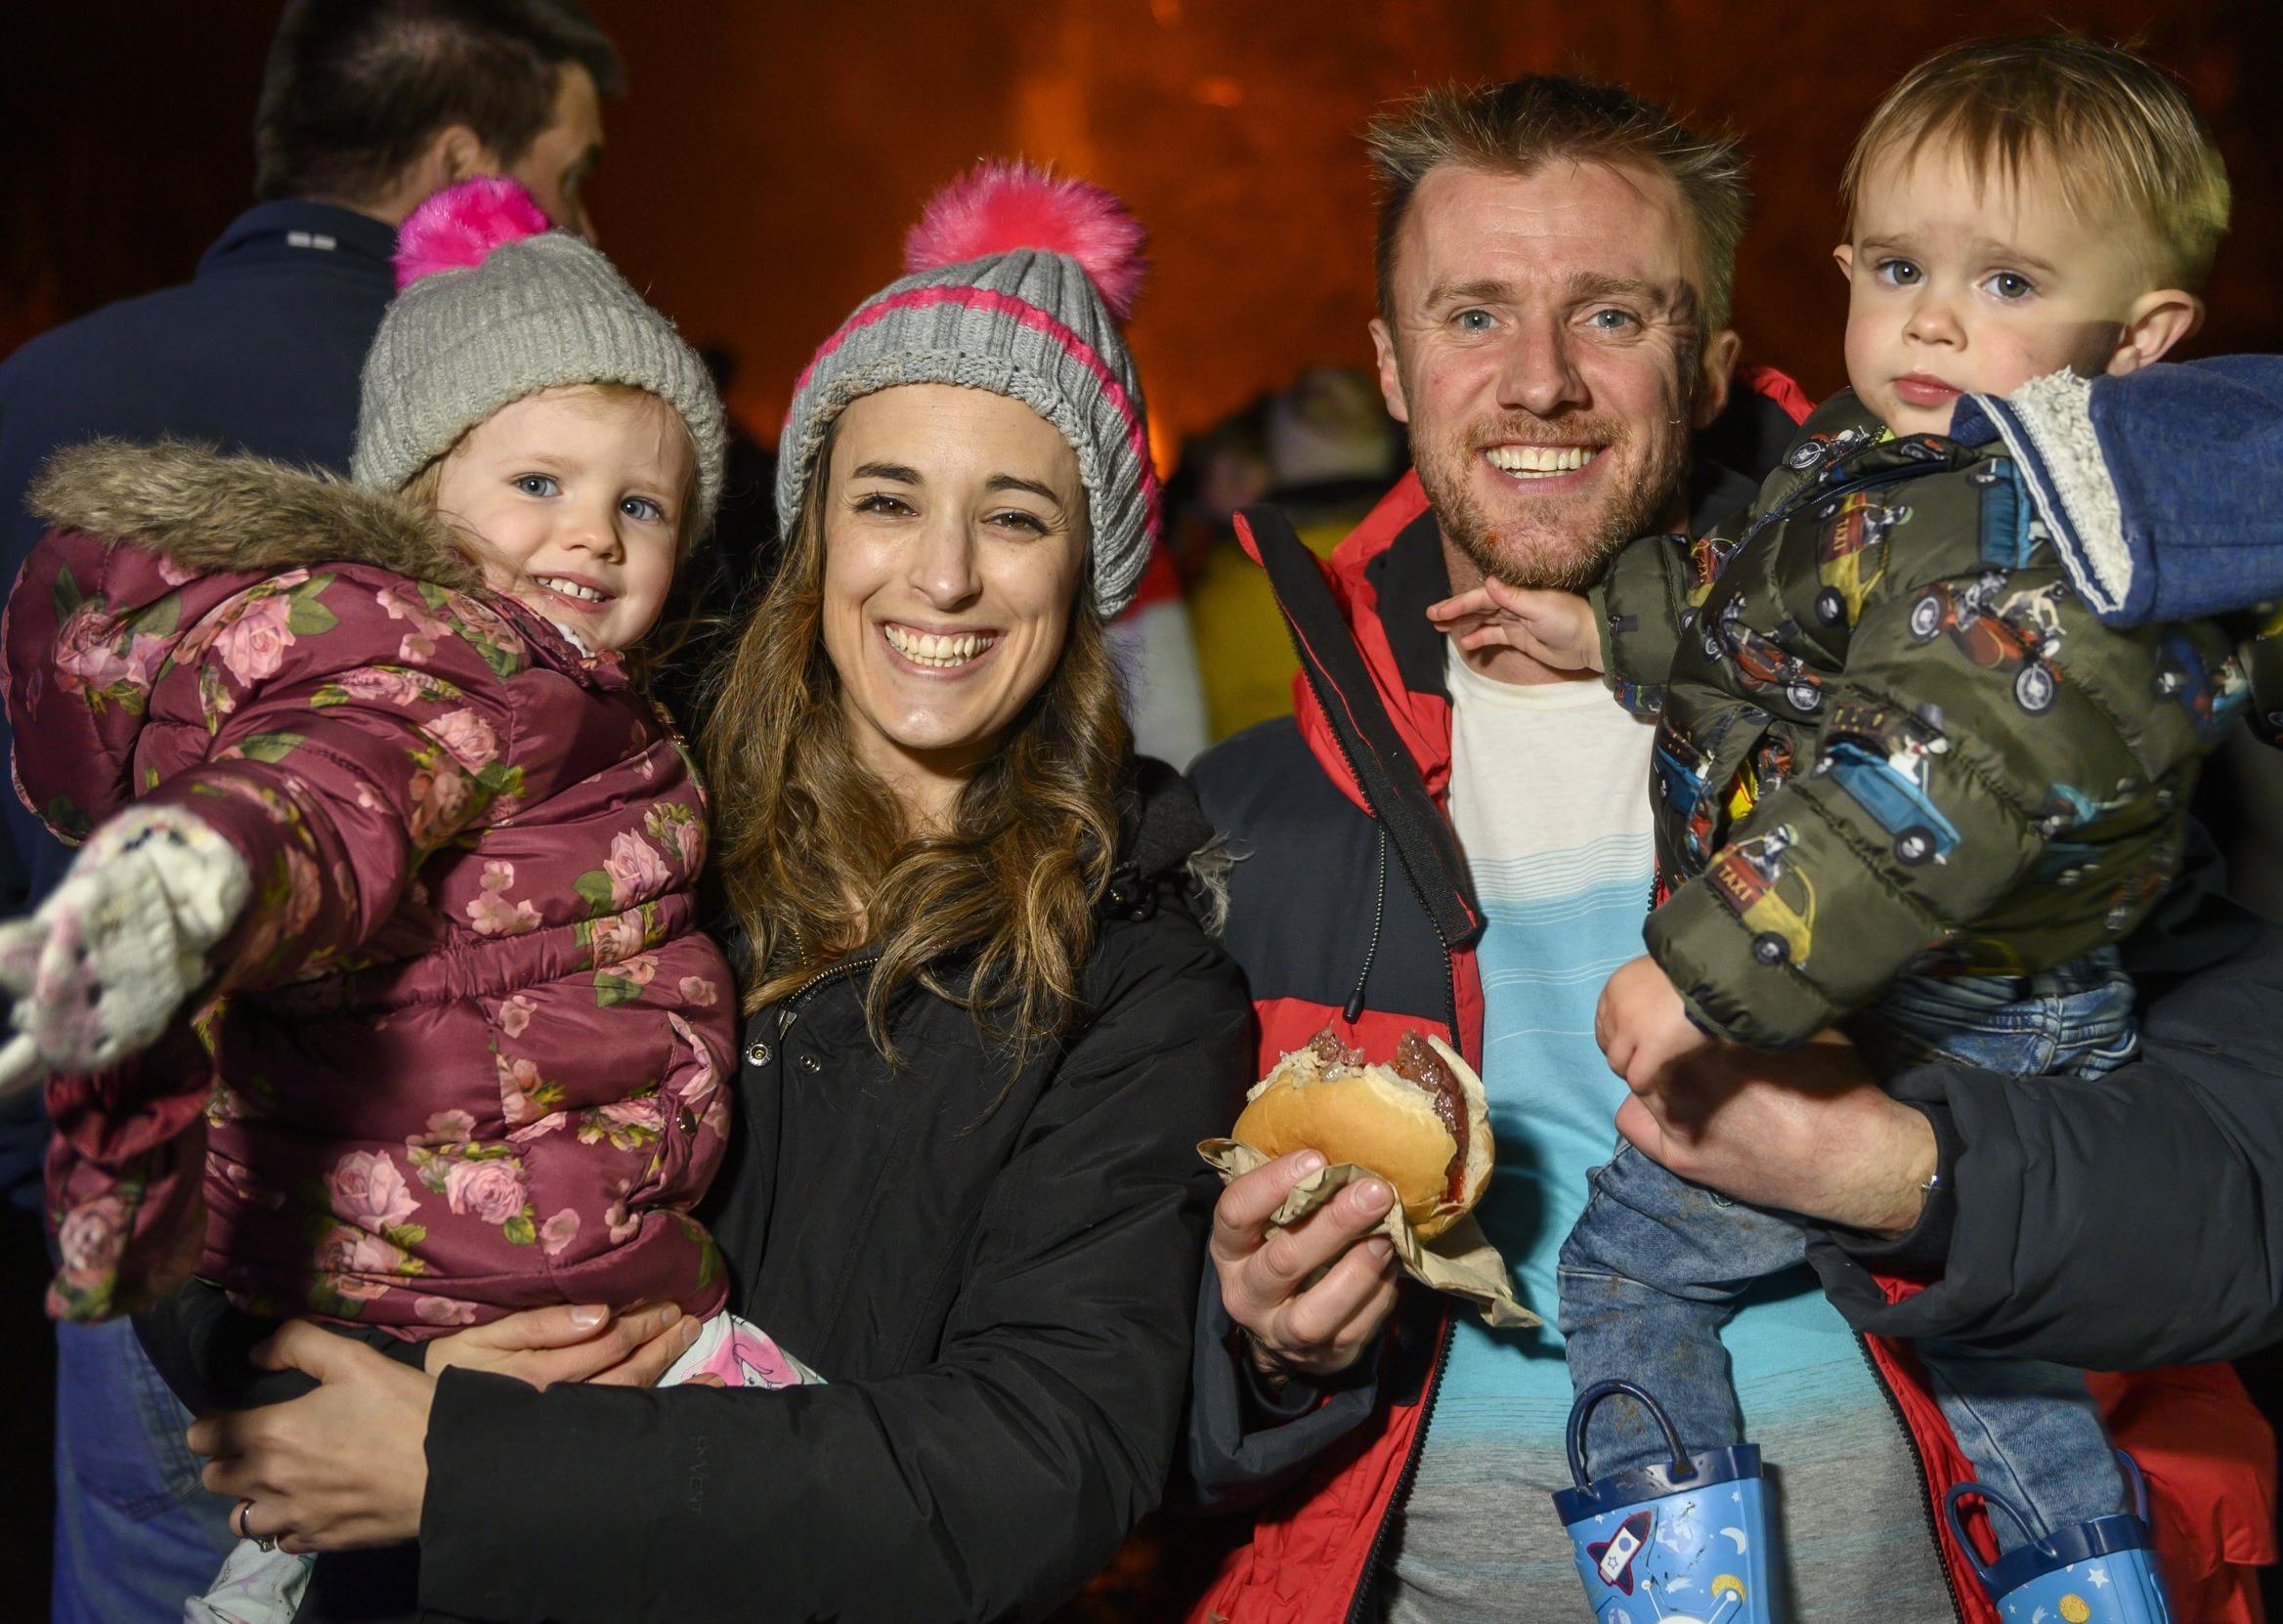 Lauder fireworks display 2019

Katy and Steven Harkin with kids Rhian and Max

Pic Phil Wilkinson 
info@philspix.com